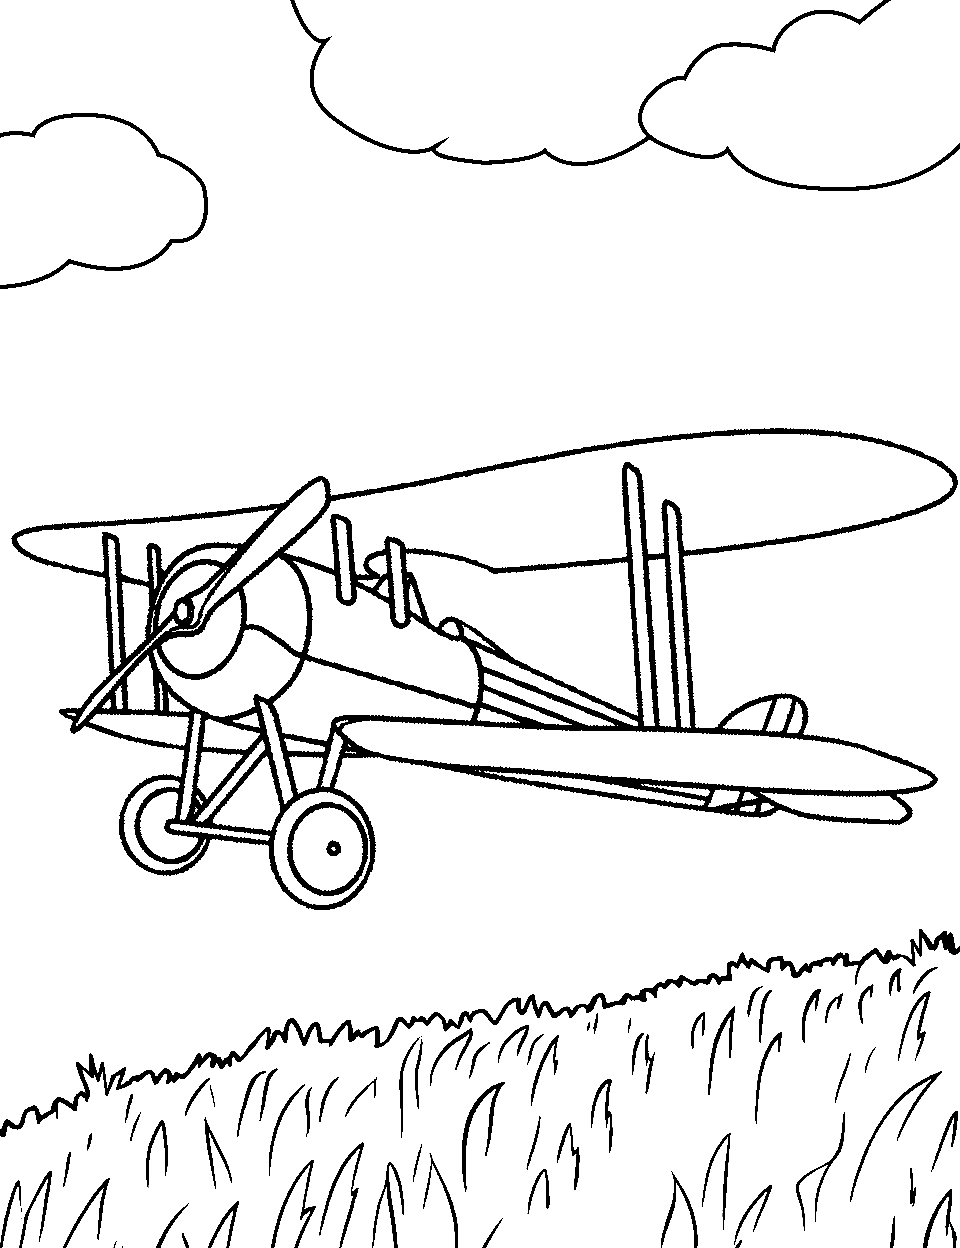 Classic Biplane Airplane Coloring Page - An old-style biplane with a propeller, flying over a simple field.